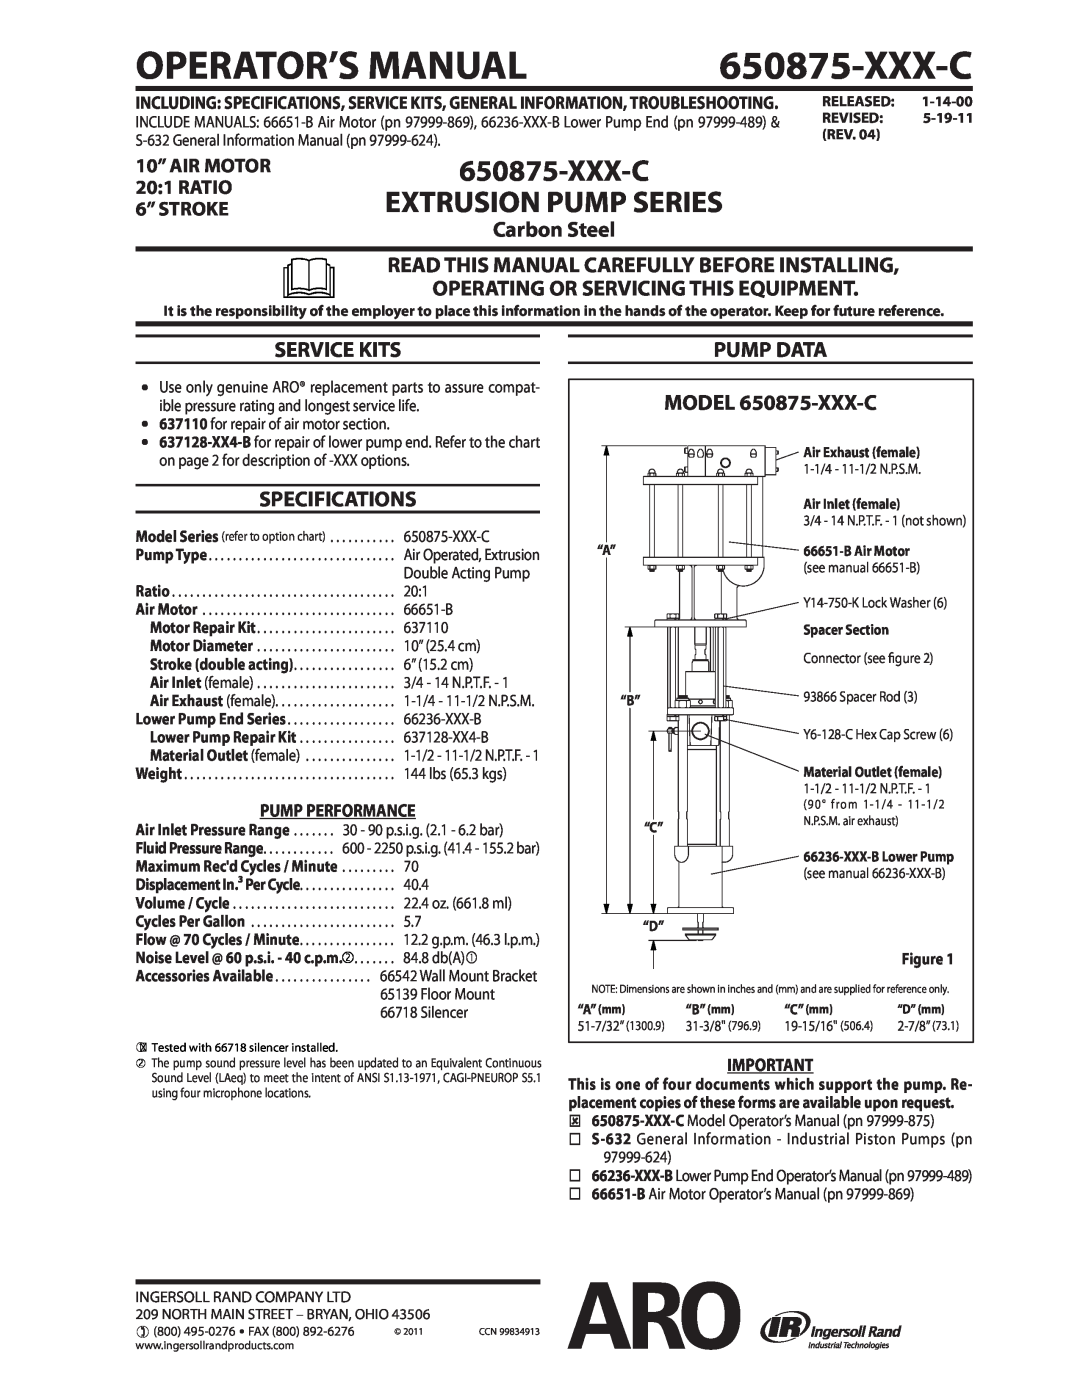 Ingersoll-Rand 650875-XXX-C specifications Extrusion Pump Series, Carbon Steel, Operating Or Servicing This Equipment 